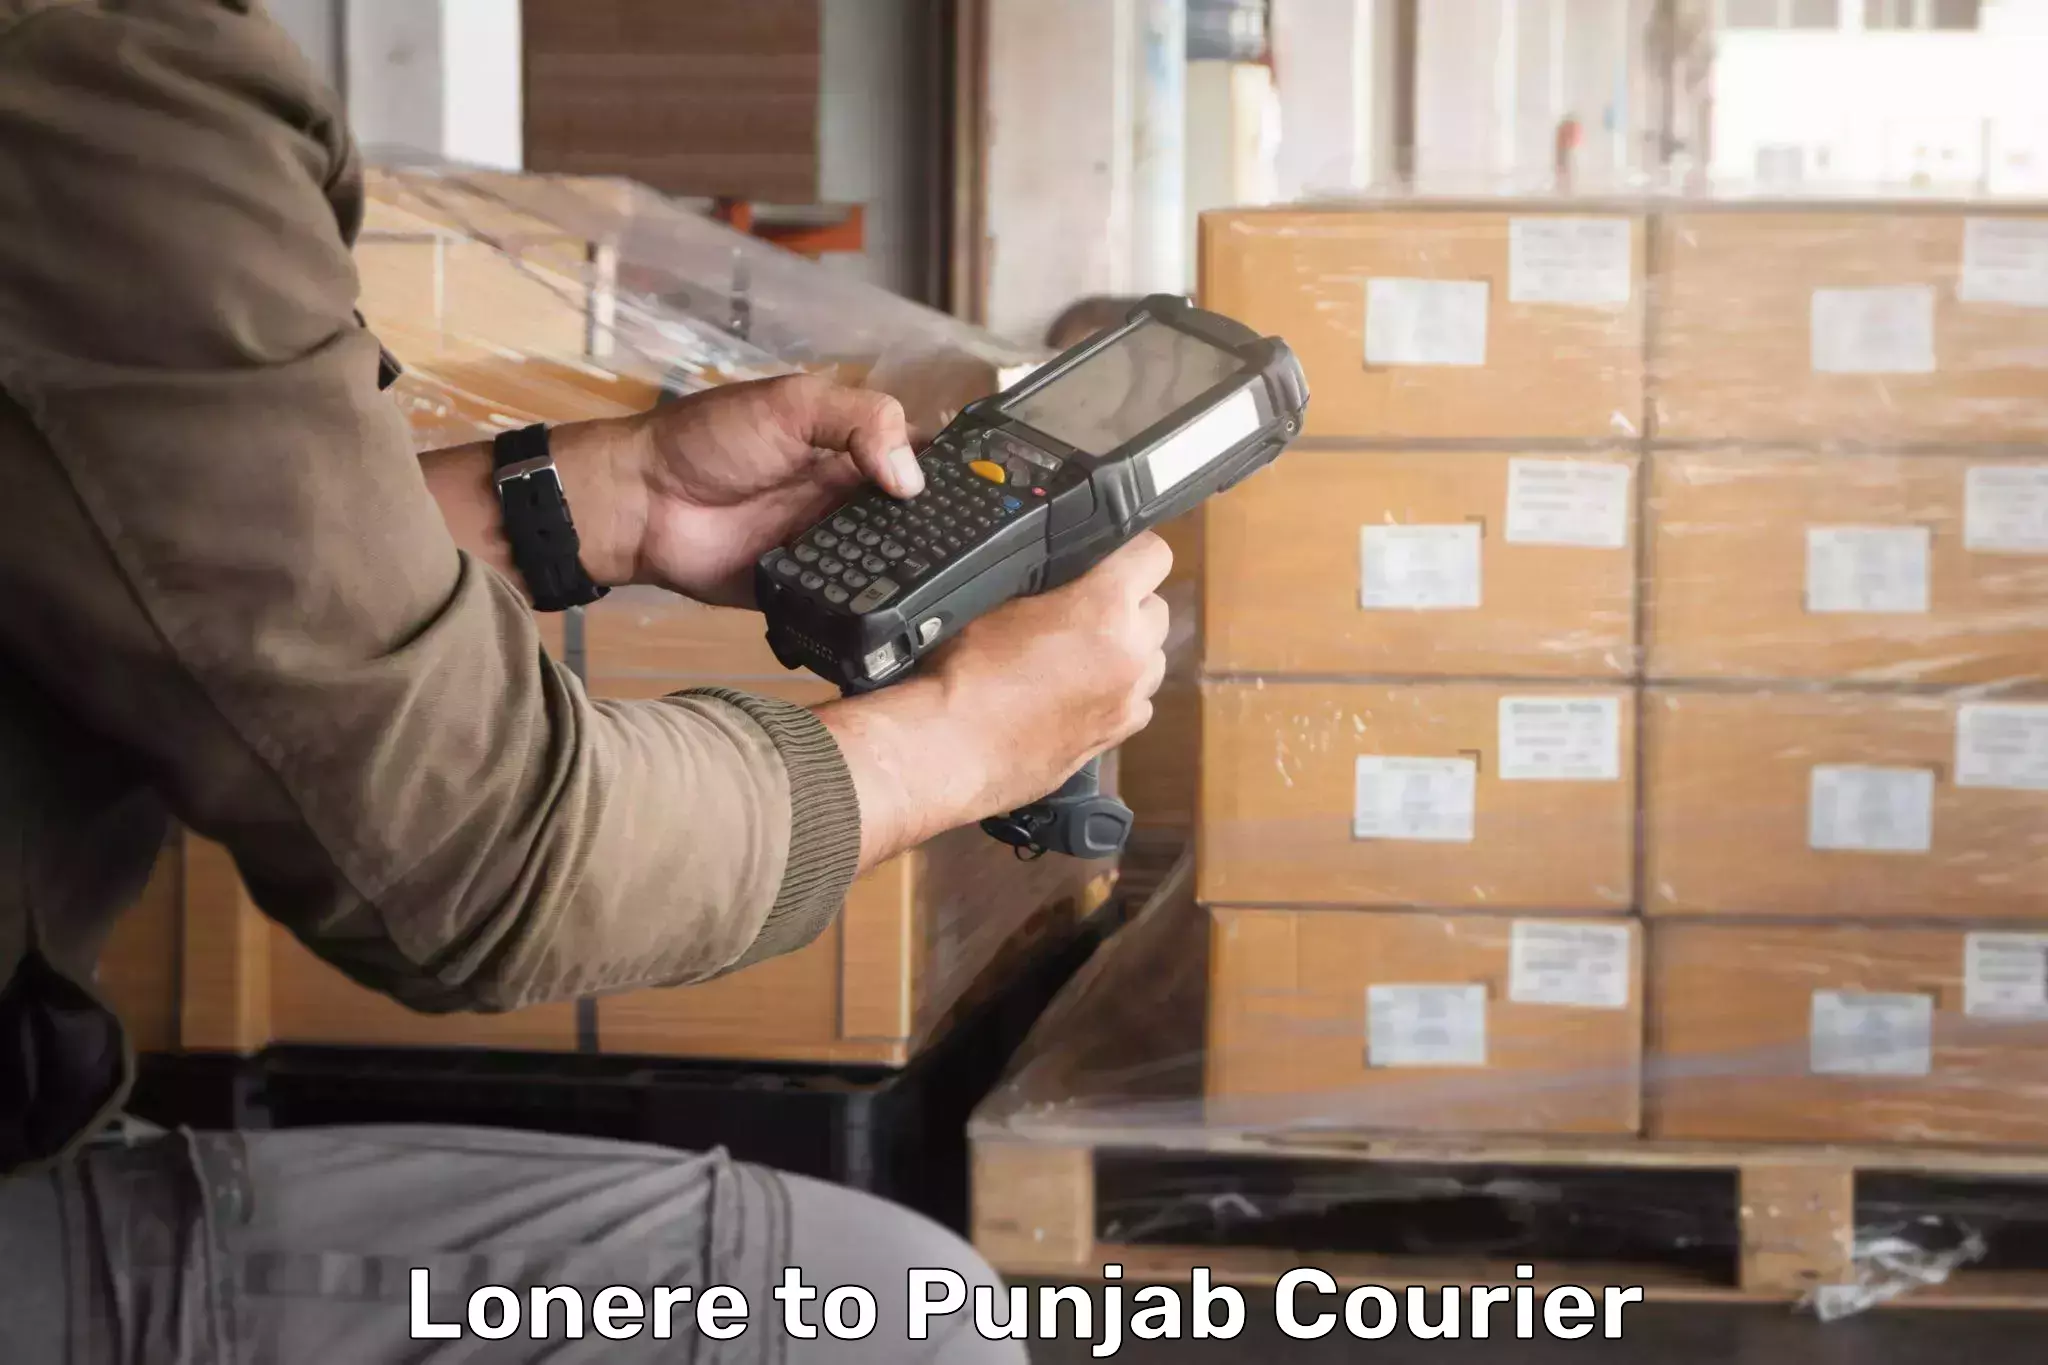 Express postal services Lonere to Amritsar